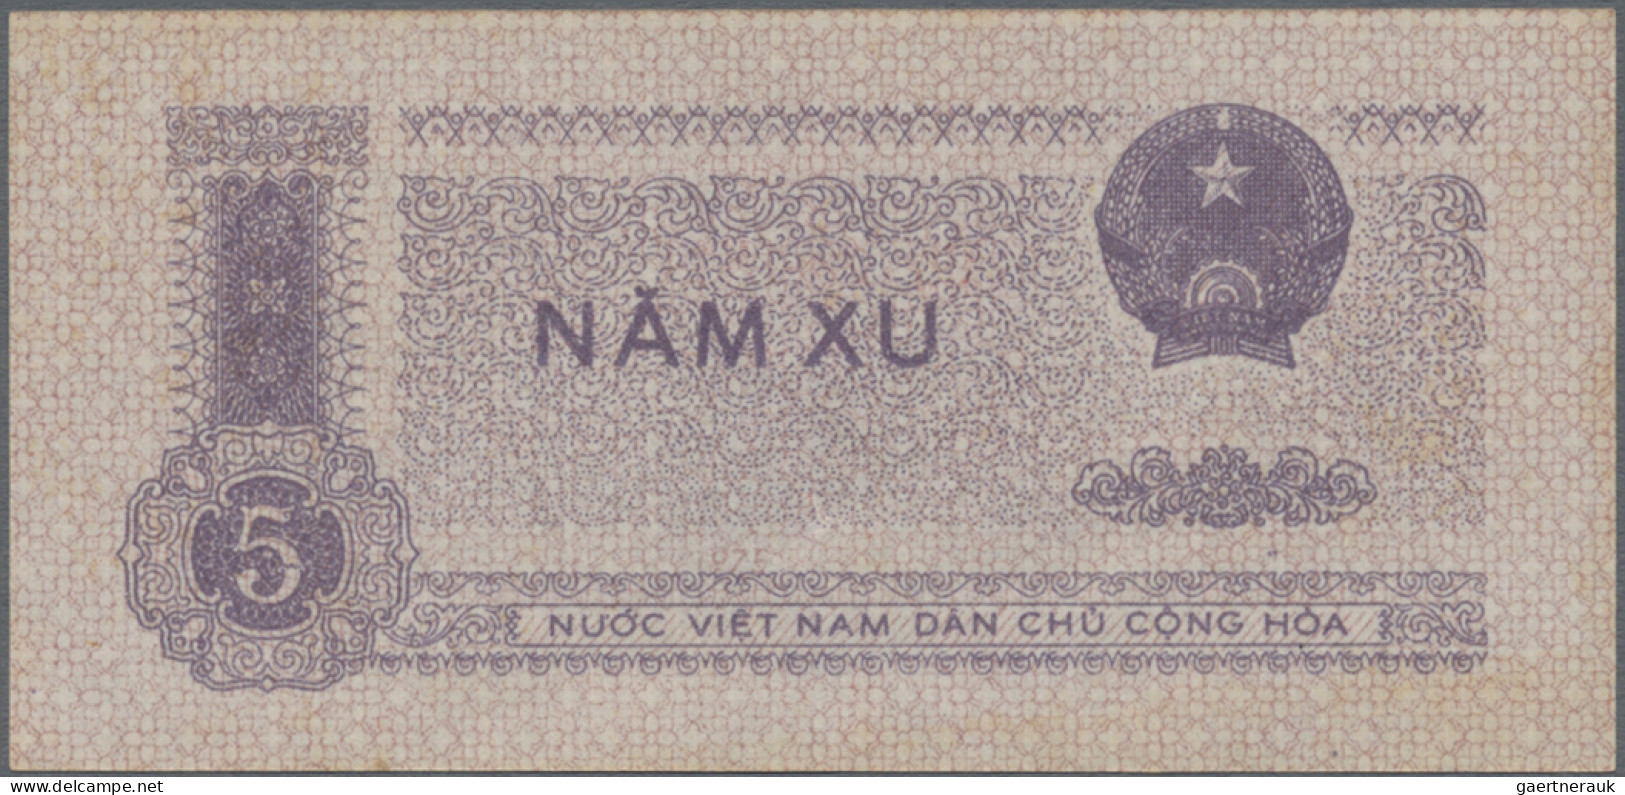 Vietnam: National Bank Of Vietnam, Lot With 5 Banknotes, Series 1958 And 1975, W - Vietnam